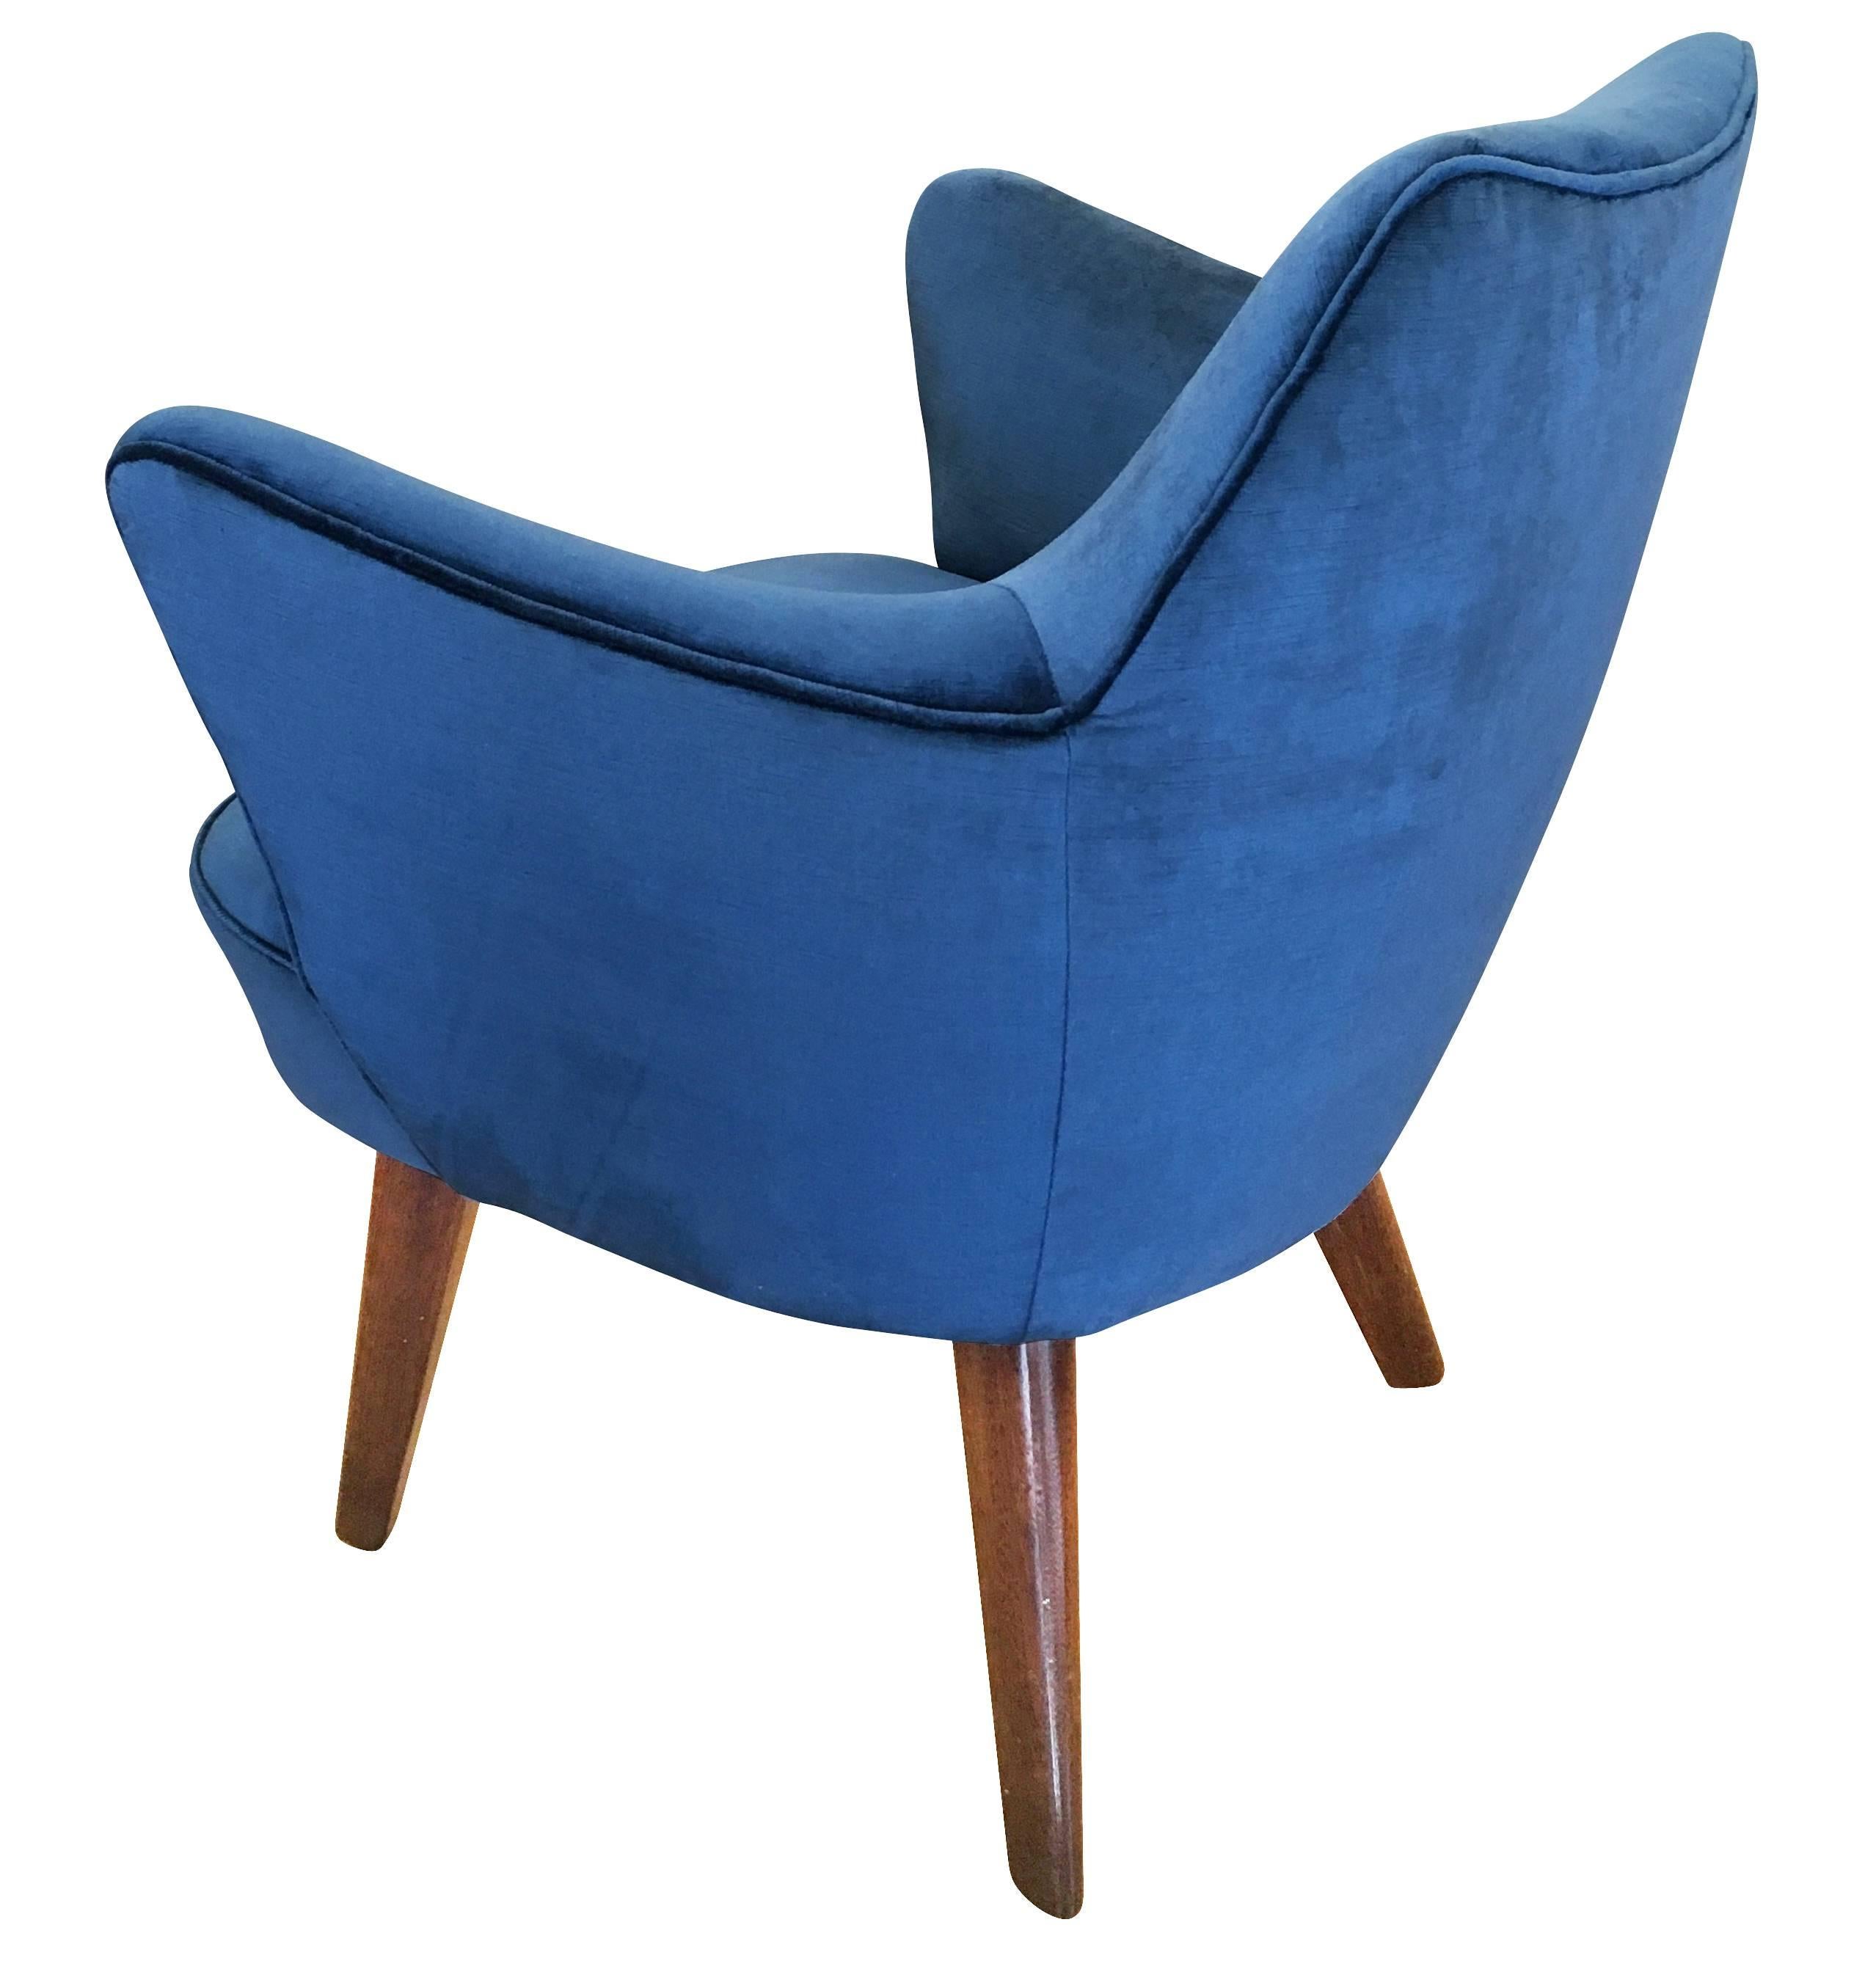 Italian Gio Ponti for Cassina Armchair with Expertise from the Archives